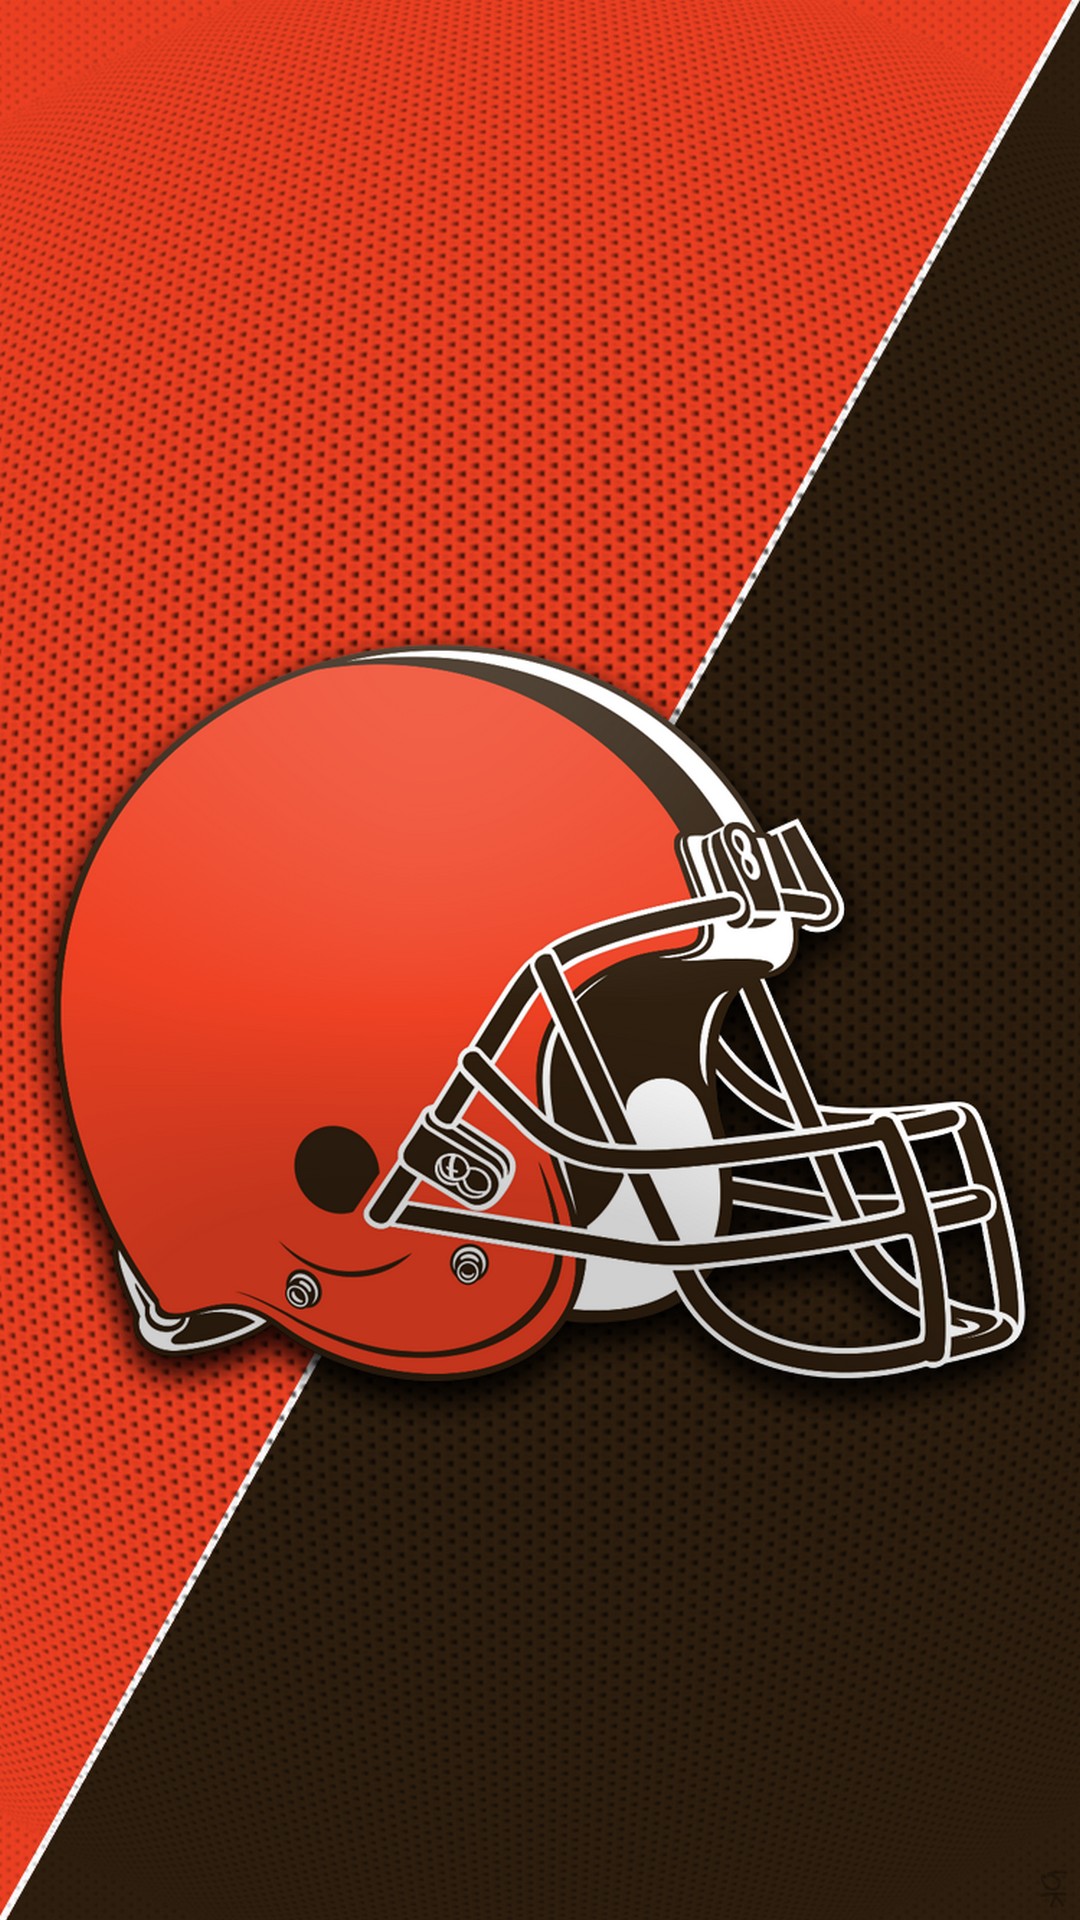 Cleveland Browns iPhone Home Screen Wallpaper with high-resolution 1080x1920 pixel. Download and set as wallpaper for Apple iPhone X, XS Max, XR, 8, 7, 6, SE, iPad, Android